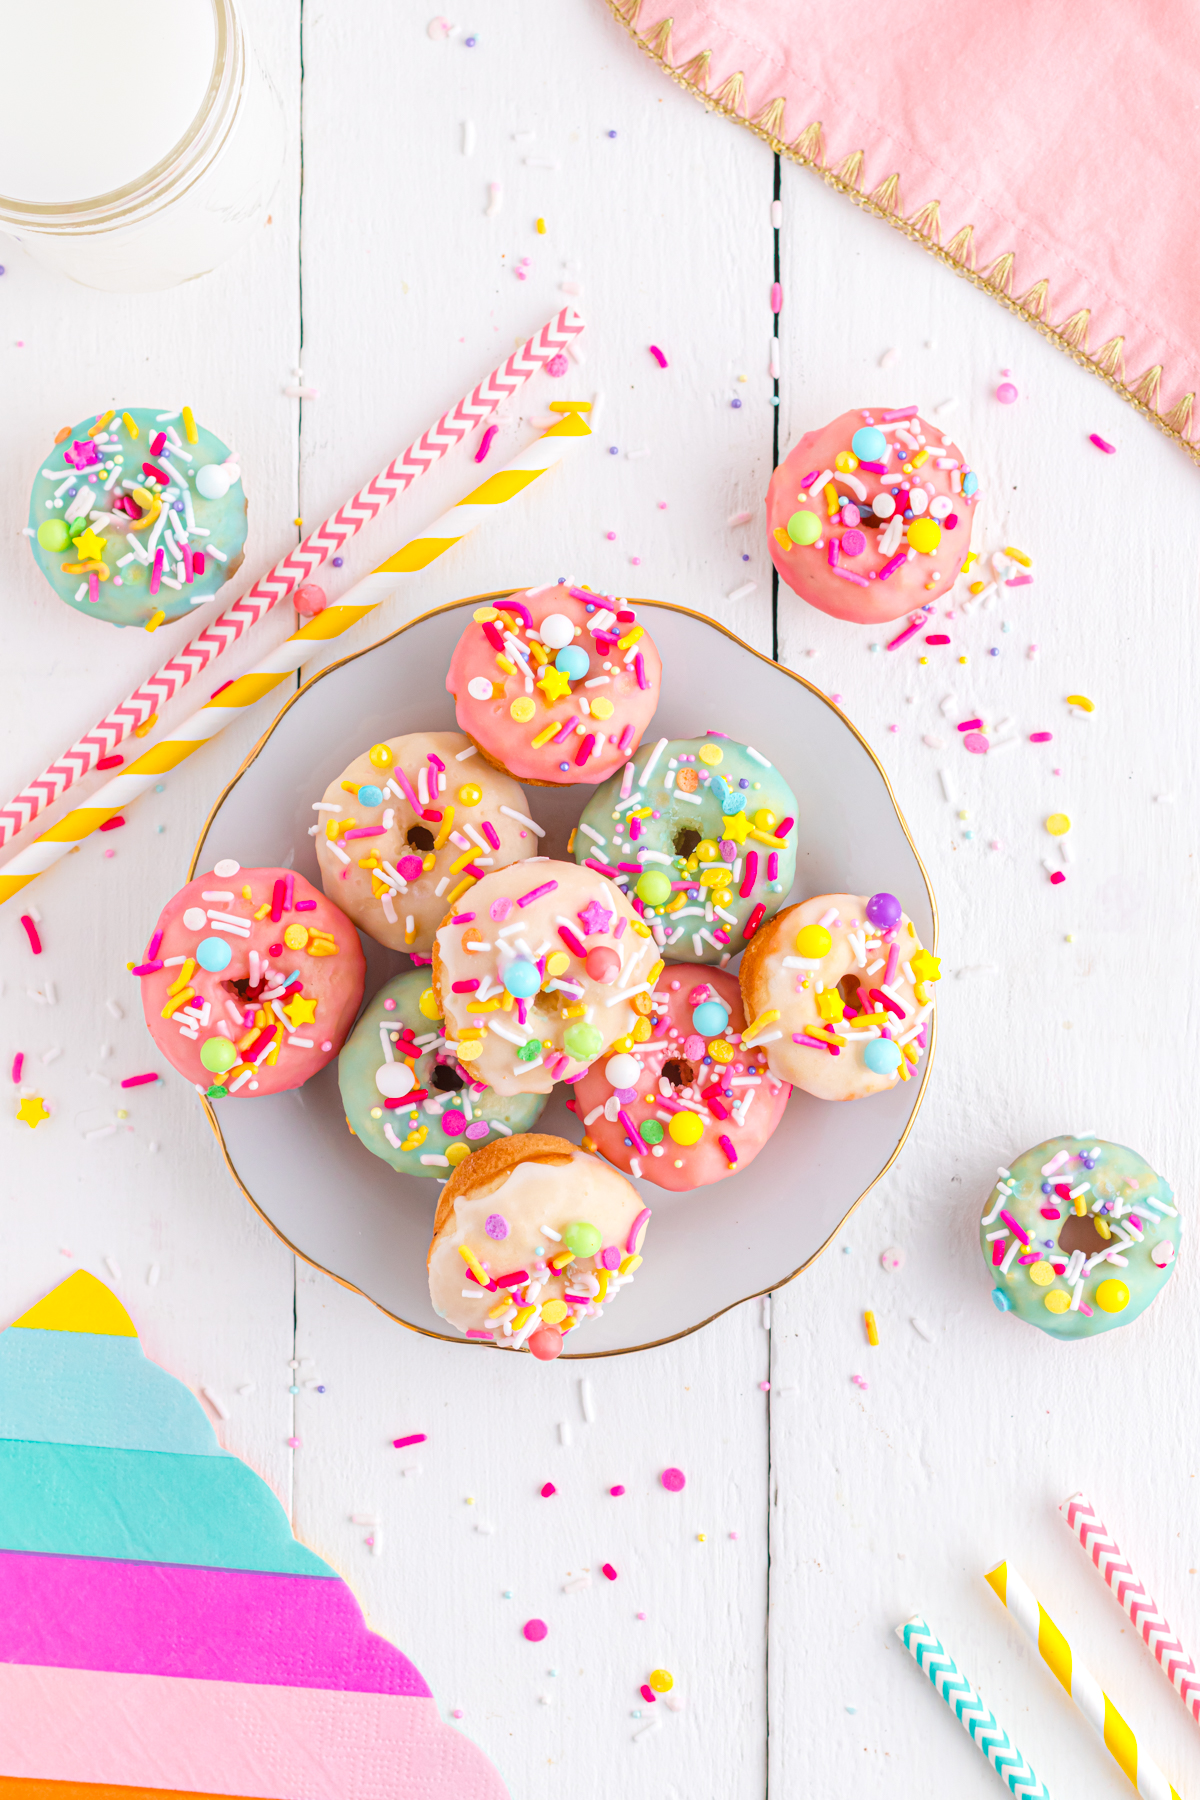 Donuts on a table with sprinkles and straws.